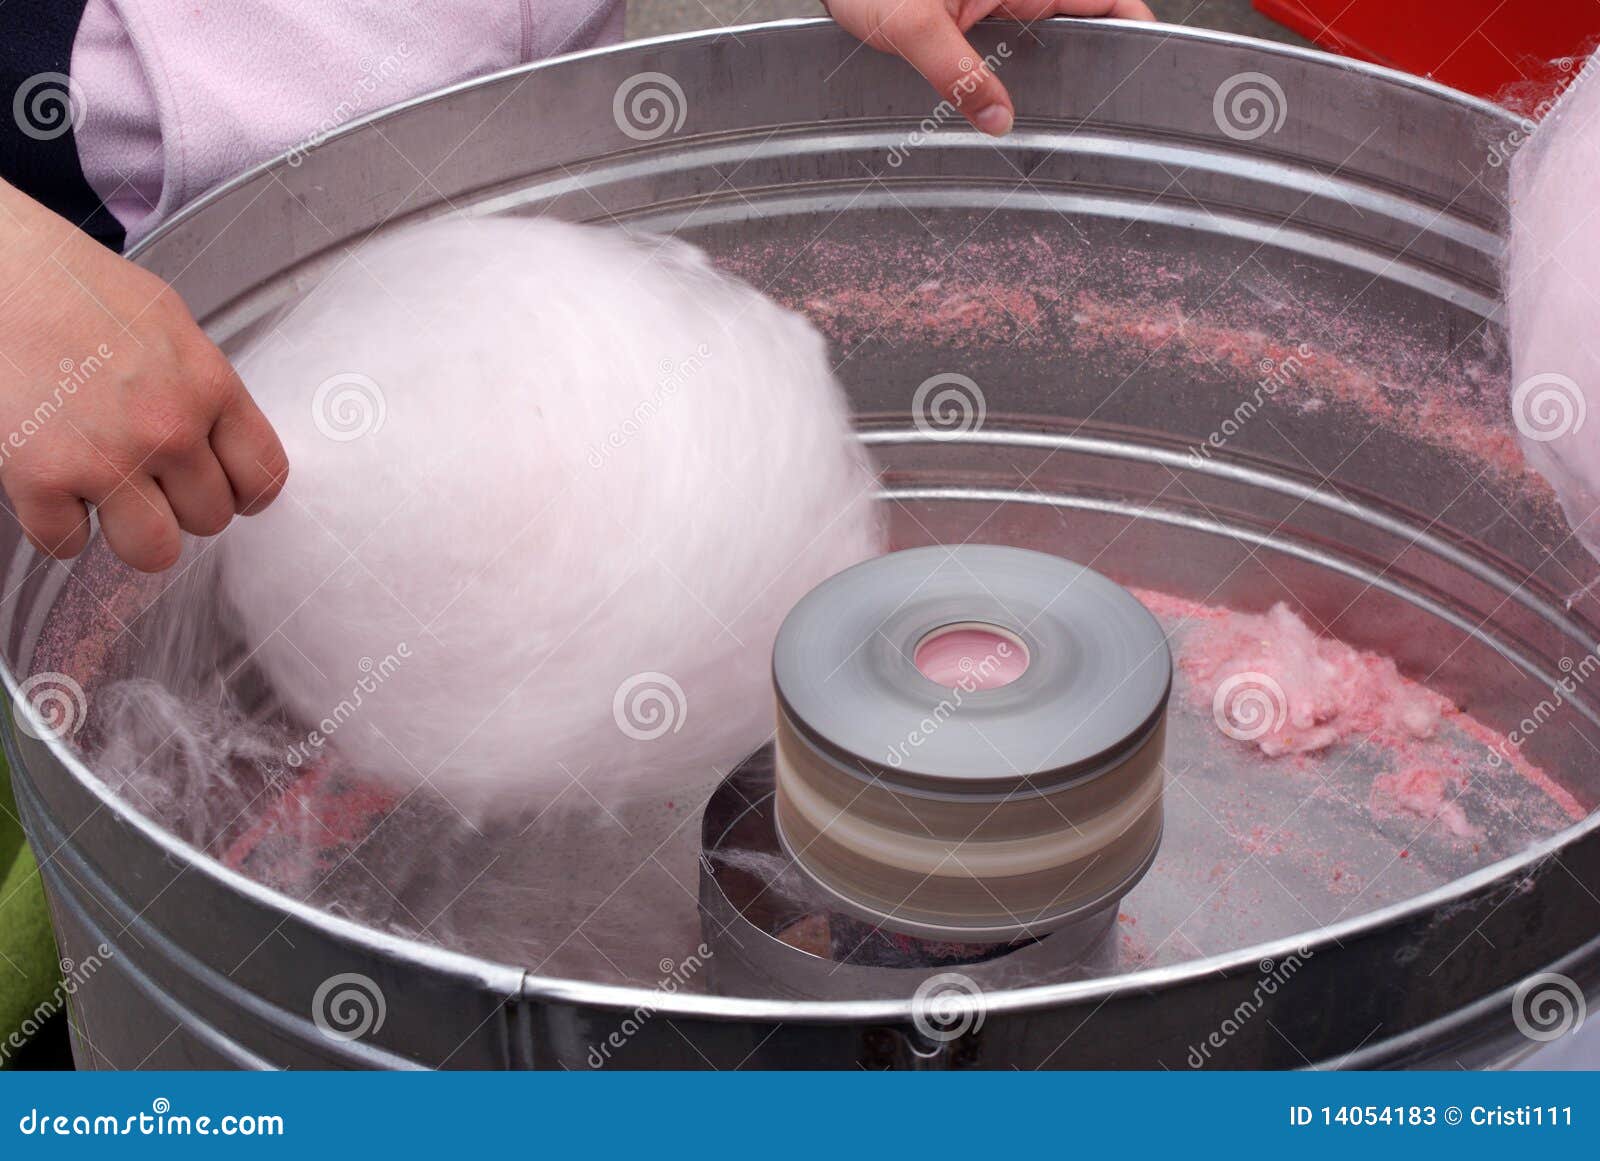 selling cotton candy